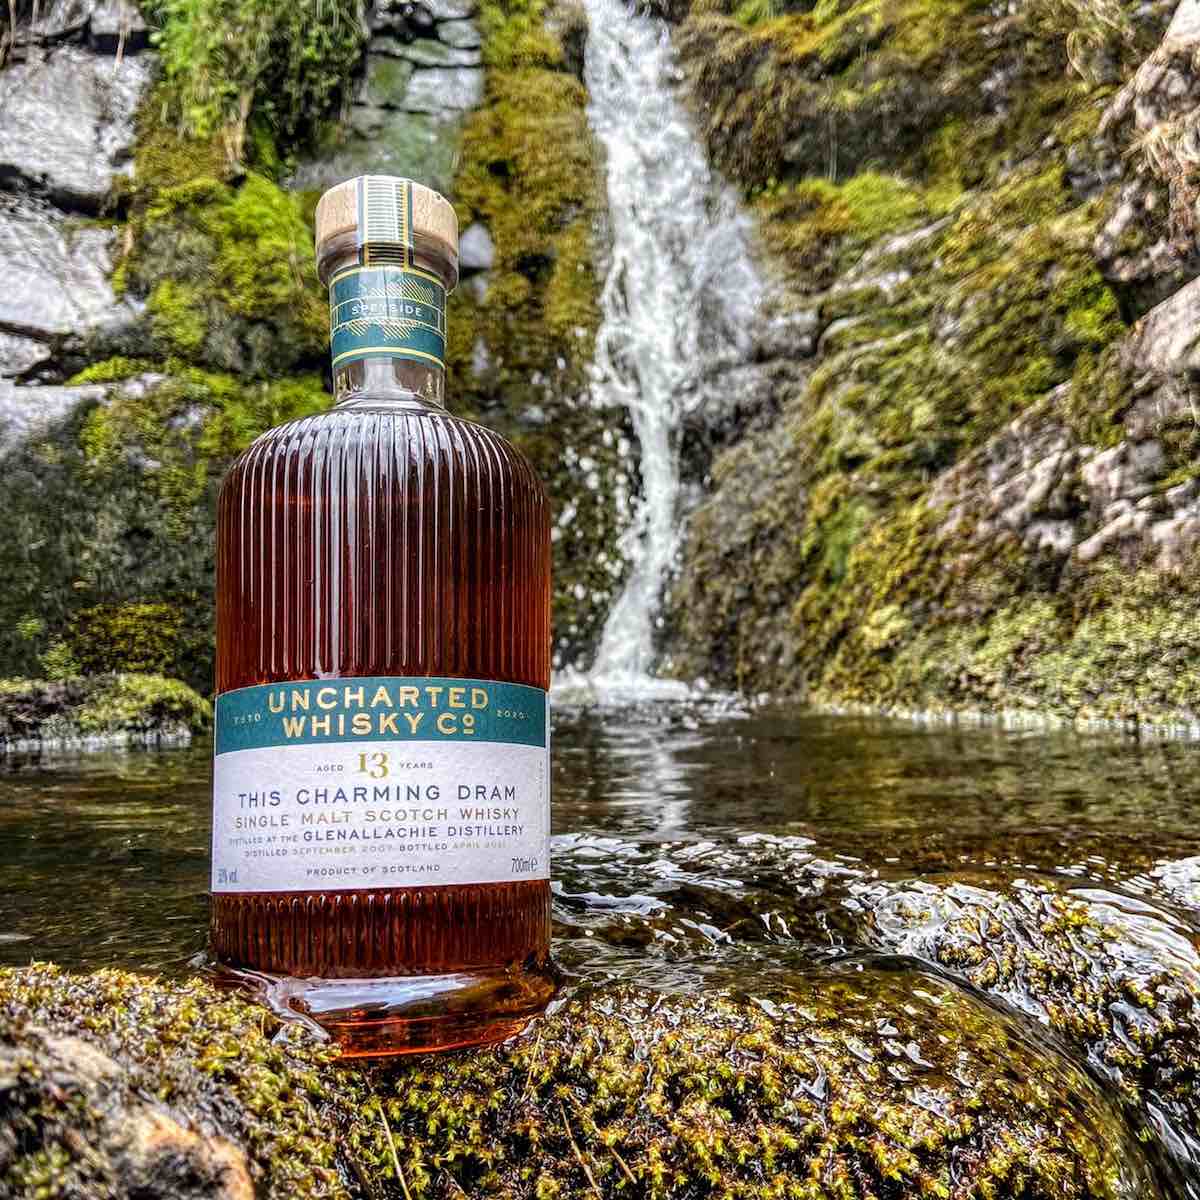 Uncharted Whisky Co, Off The Grid Malts